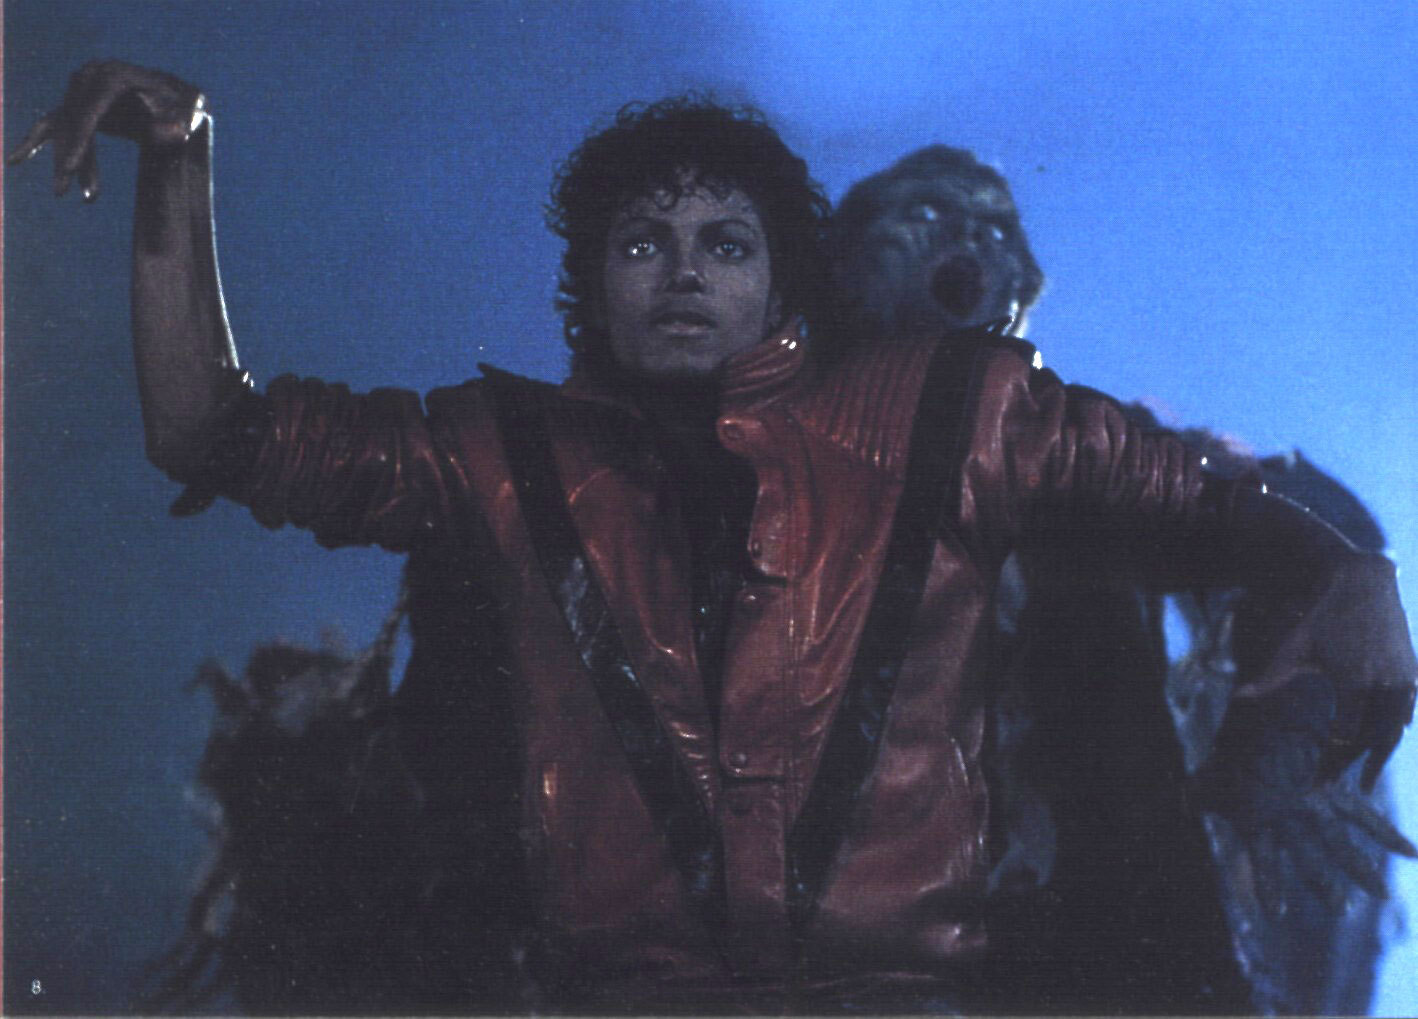 Photo of Thriller for fans of Michael Jackson. 